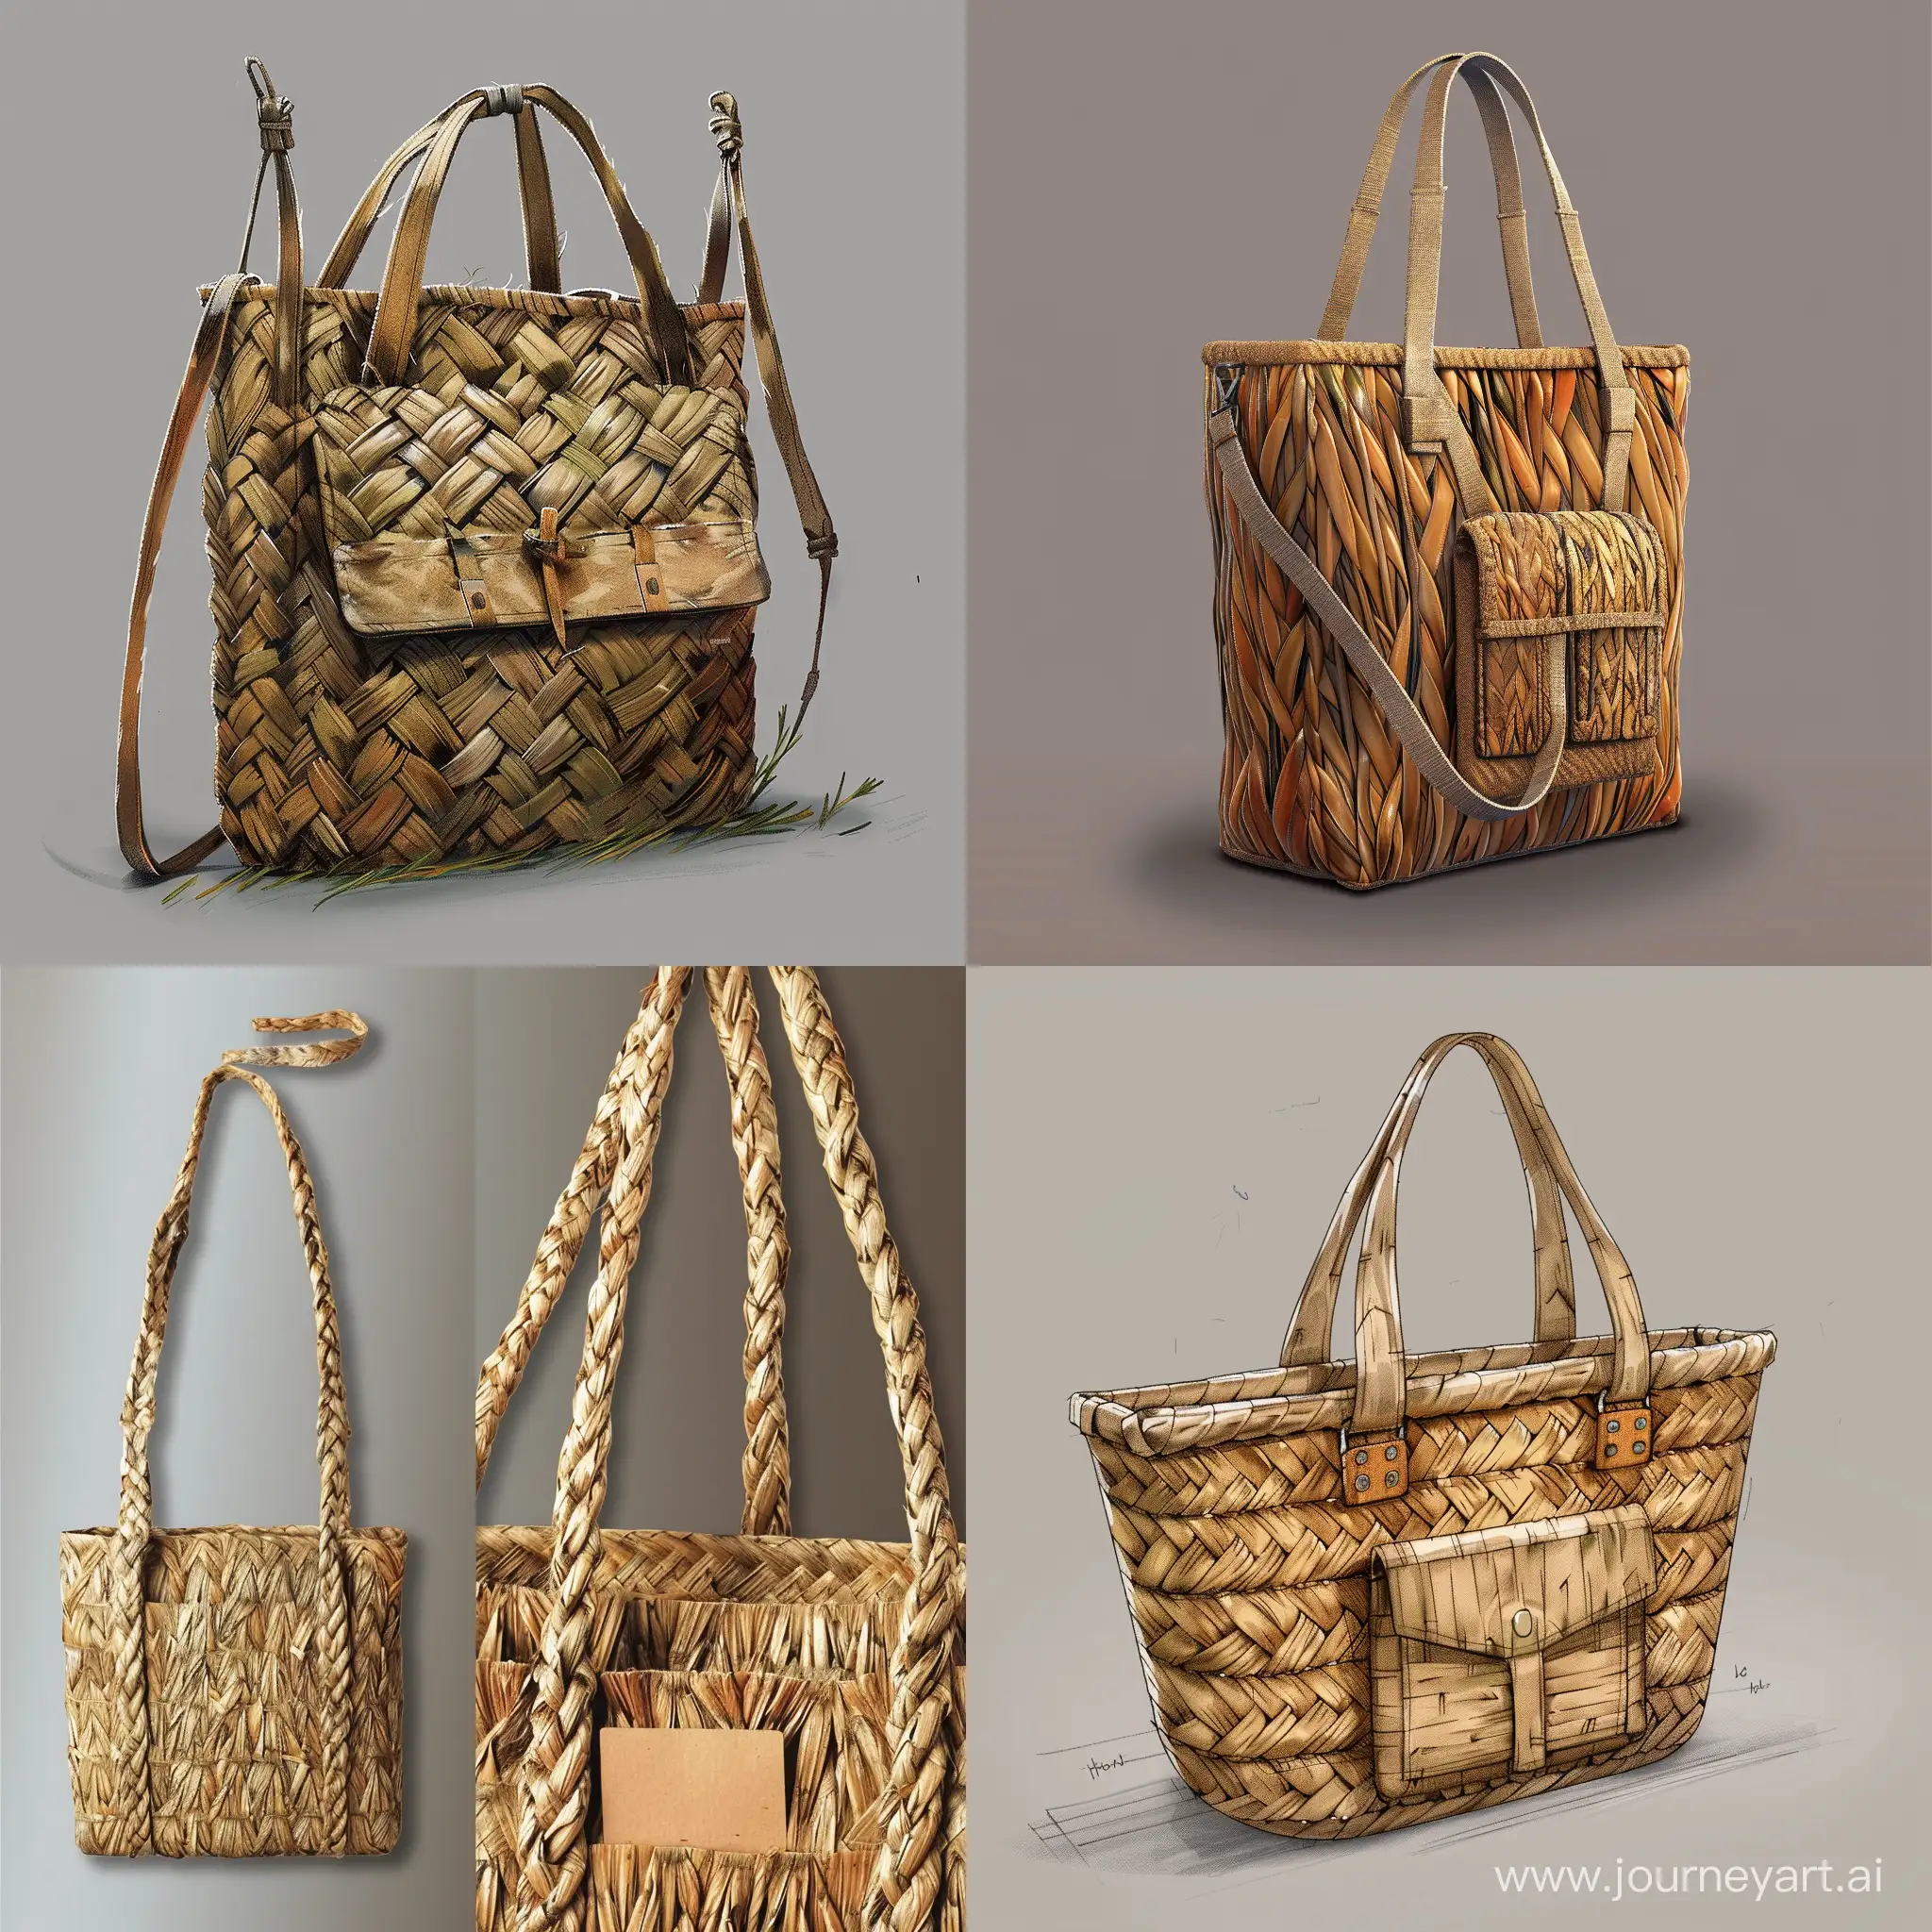 Create a hyper-realistic image of a modern and stylish tote bag designed for young people, crafted from water hyacinth. The design showcases the unique, natural texture and color of water hyacinth, blending seamlessly with contemporary fashion trends. The bag should feature practical elements such as adjustable straps, multiple pockets for efficient organization, and a secure closure mechanism. Emphasize the bag's eco-friendly aspect and its appeal to environmentally conscious consumers, with a focus on sustainability and innovative design.